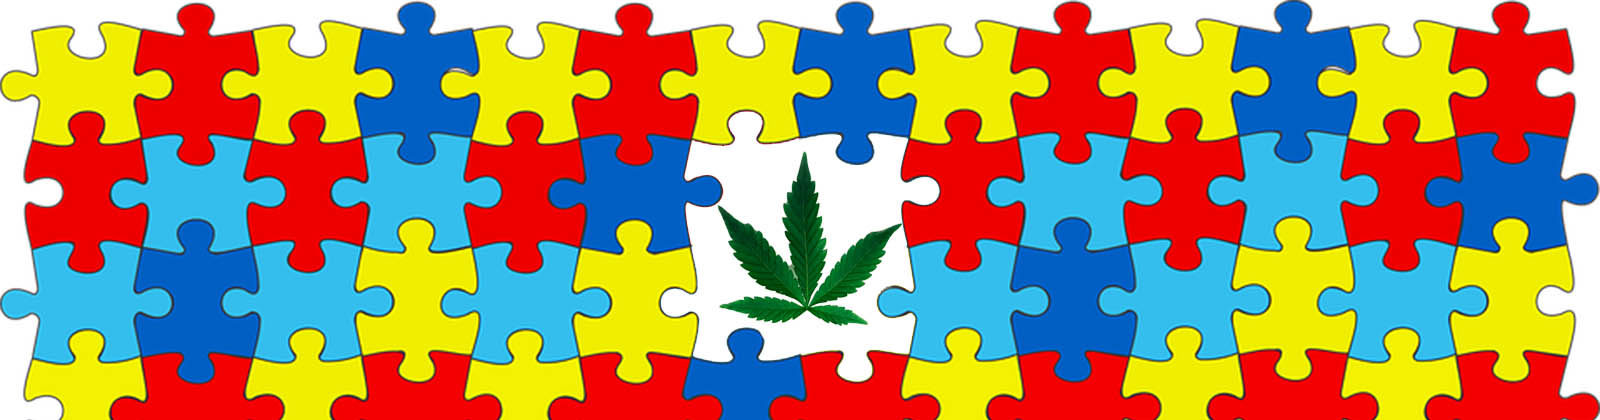 Cannabis for autism harm reduction.